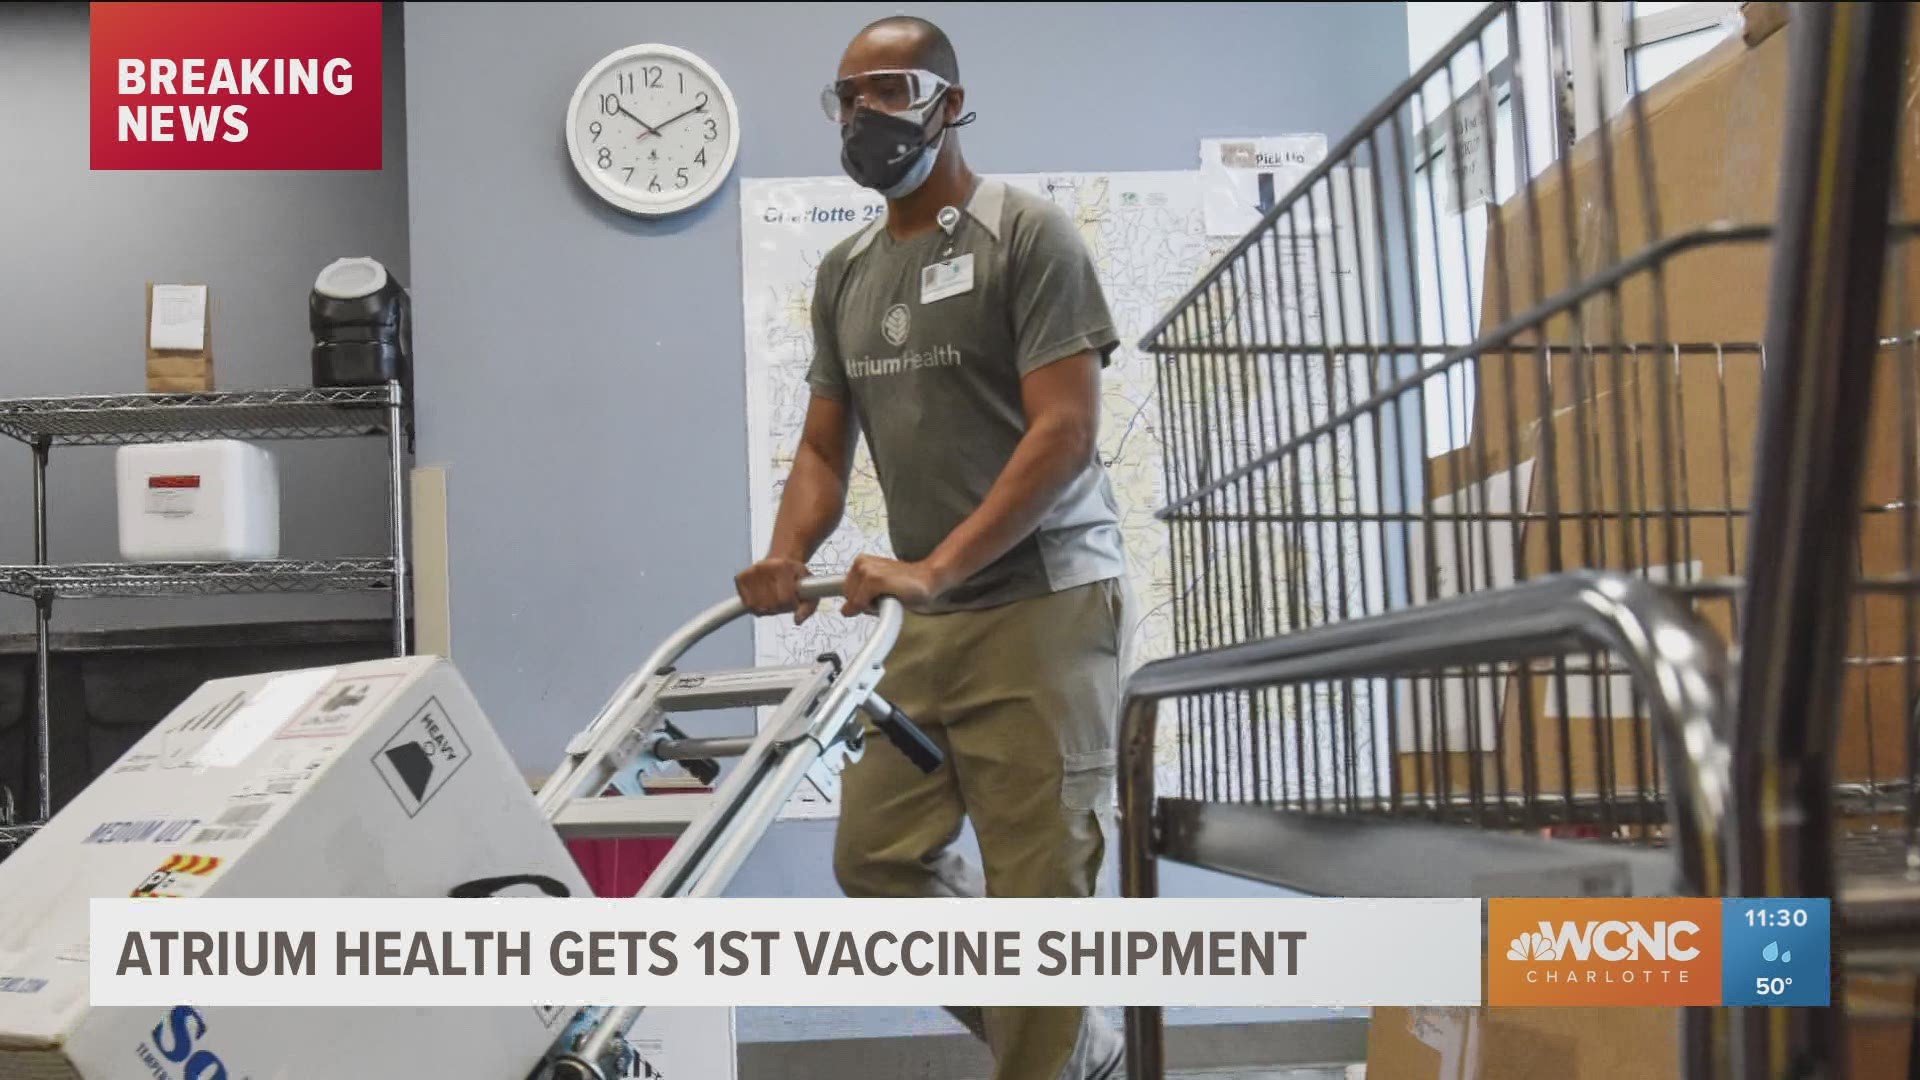 Atrium Health received its first shipment of the Pfizer COVID-19 vaccine Monday, 277 days after the first reported case of the coronavirus was reported in Charlotte.